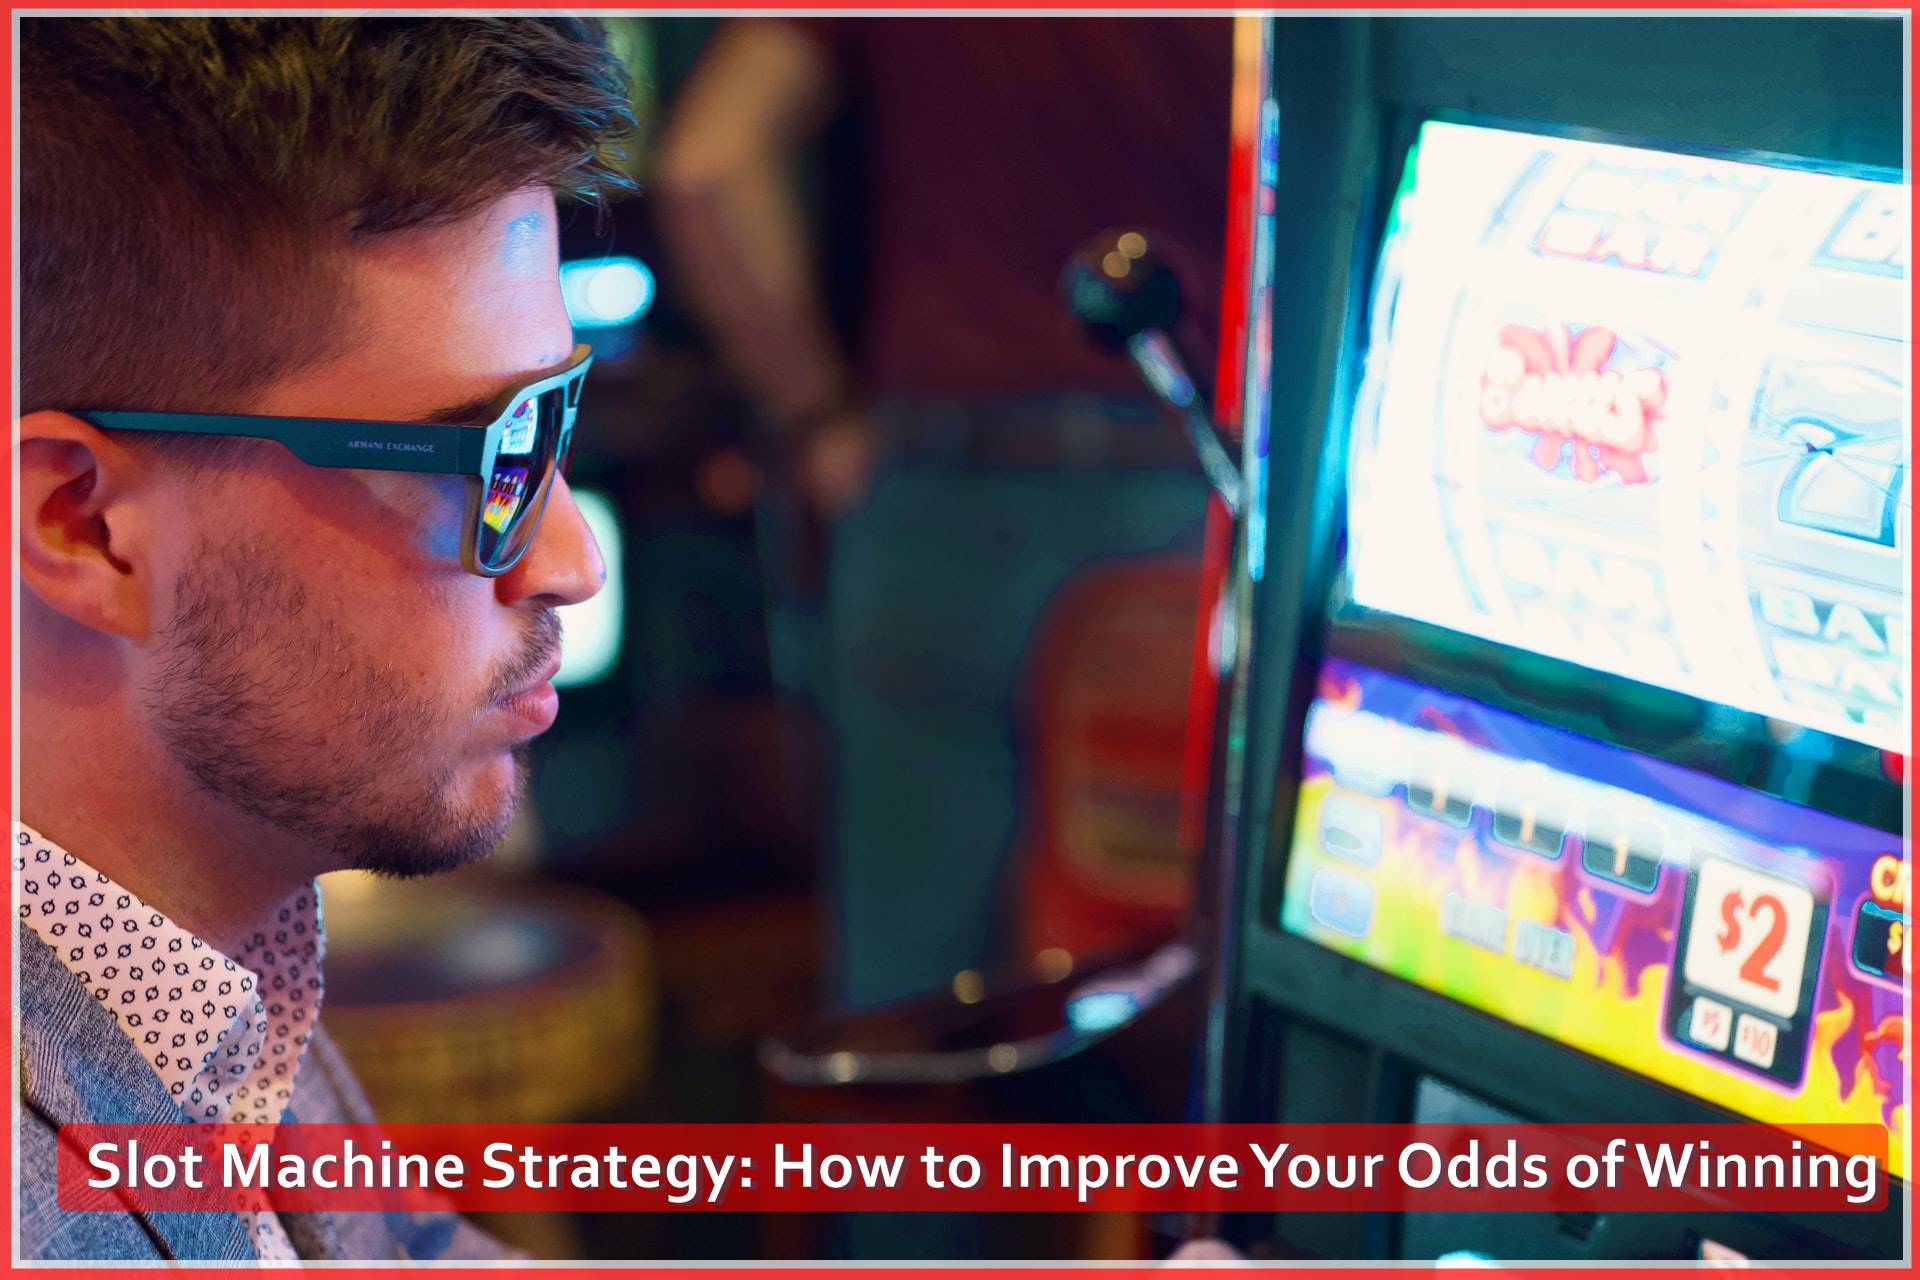 Slot Machine Strategy: How to Improve Your Odds of Winning